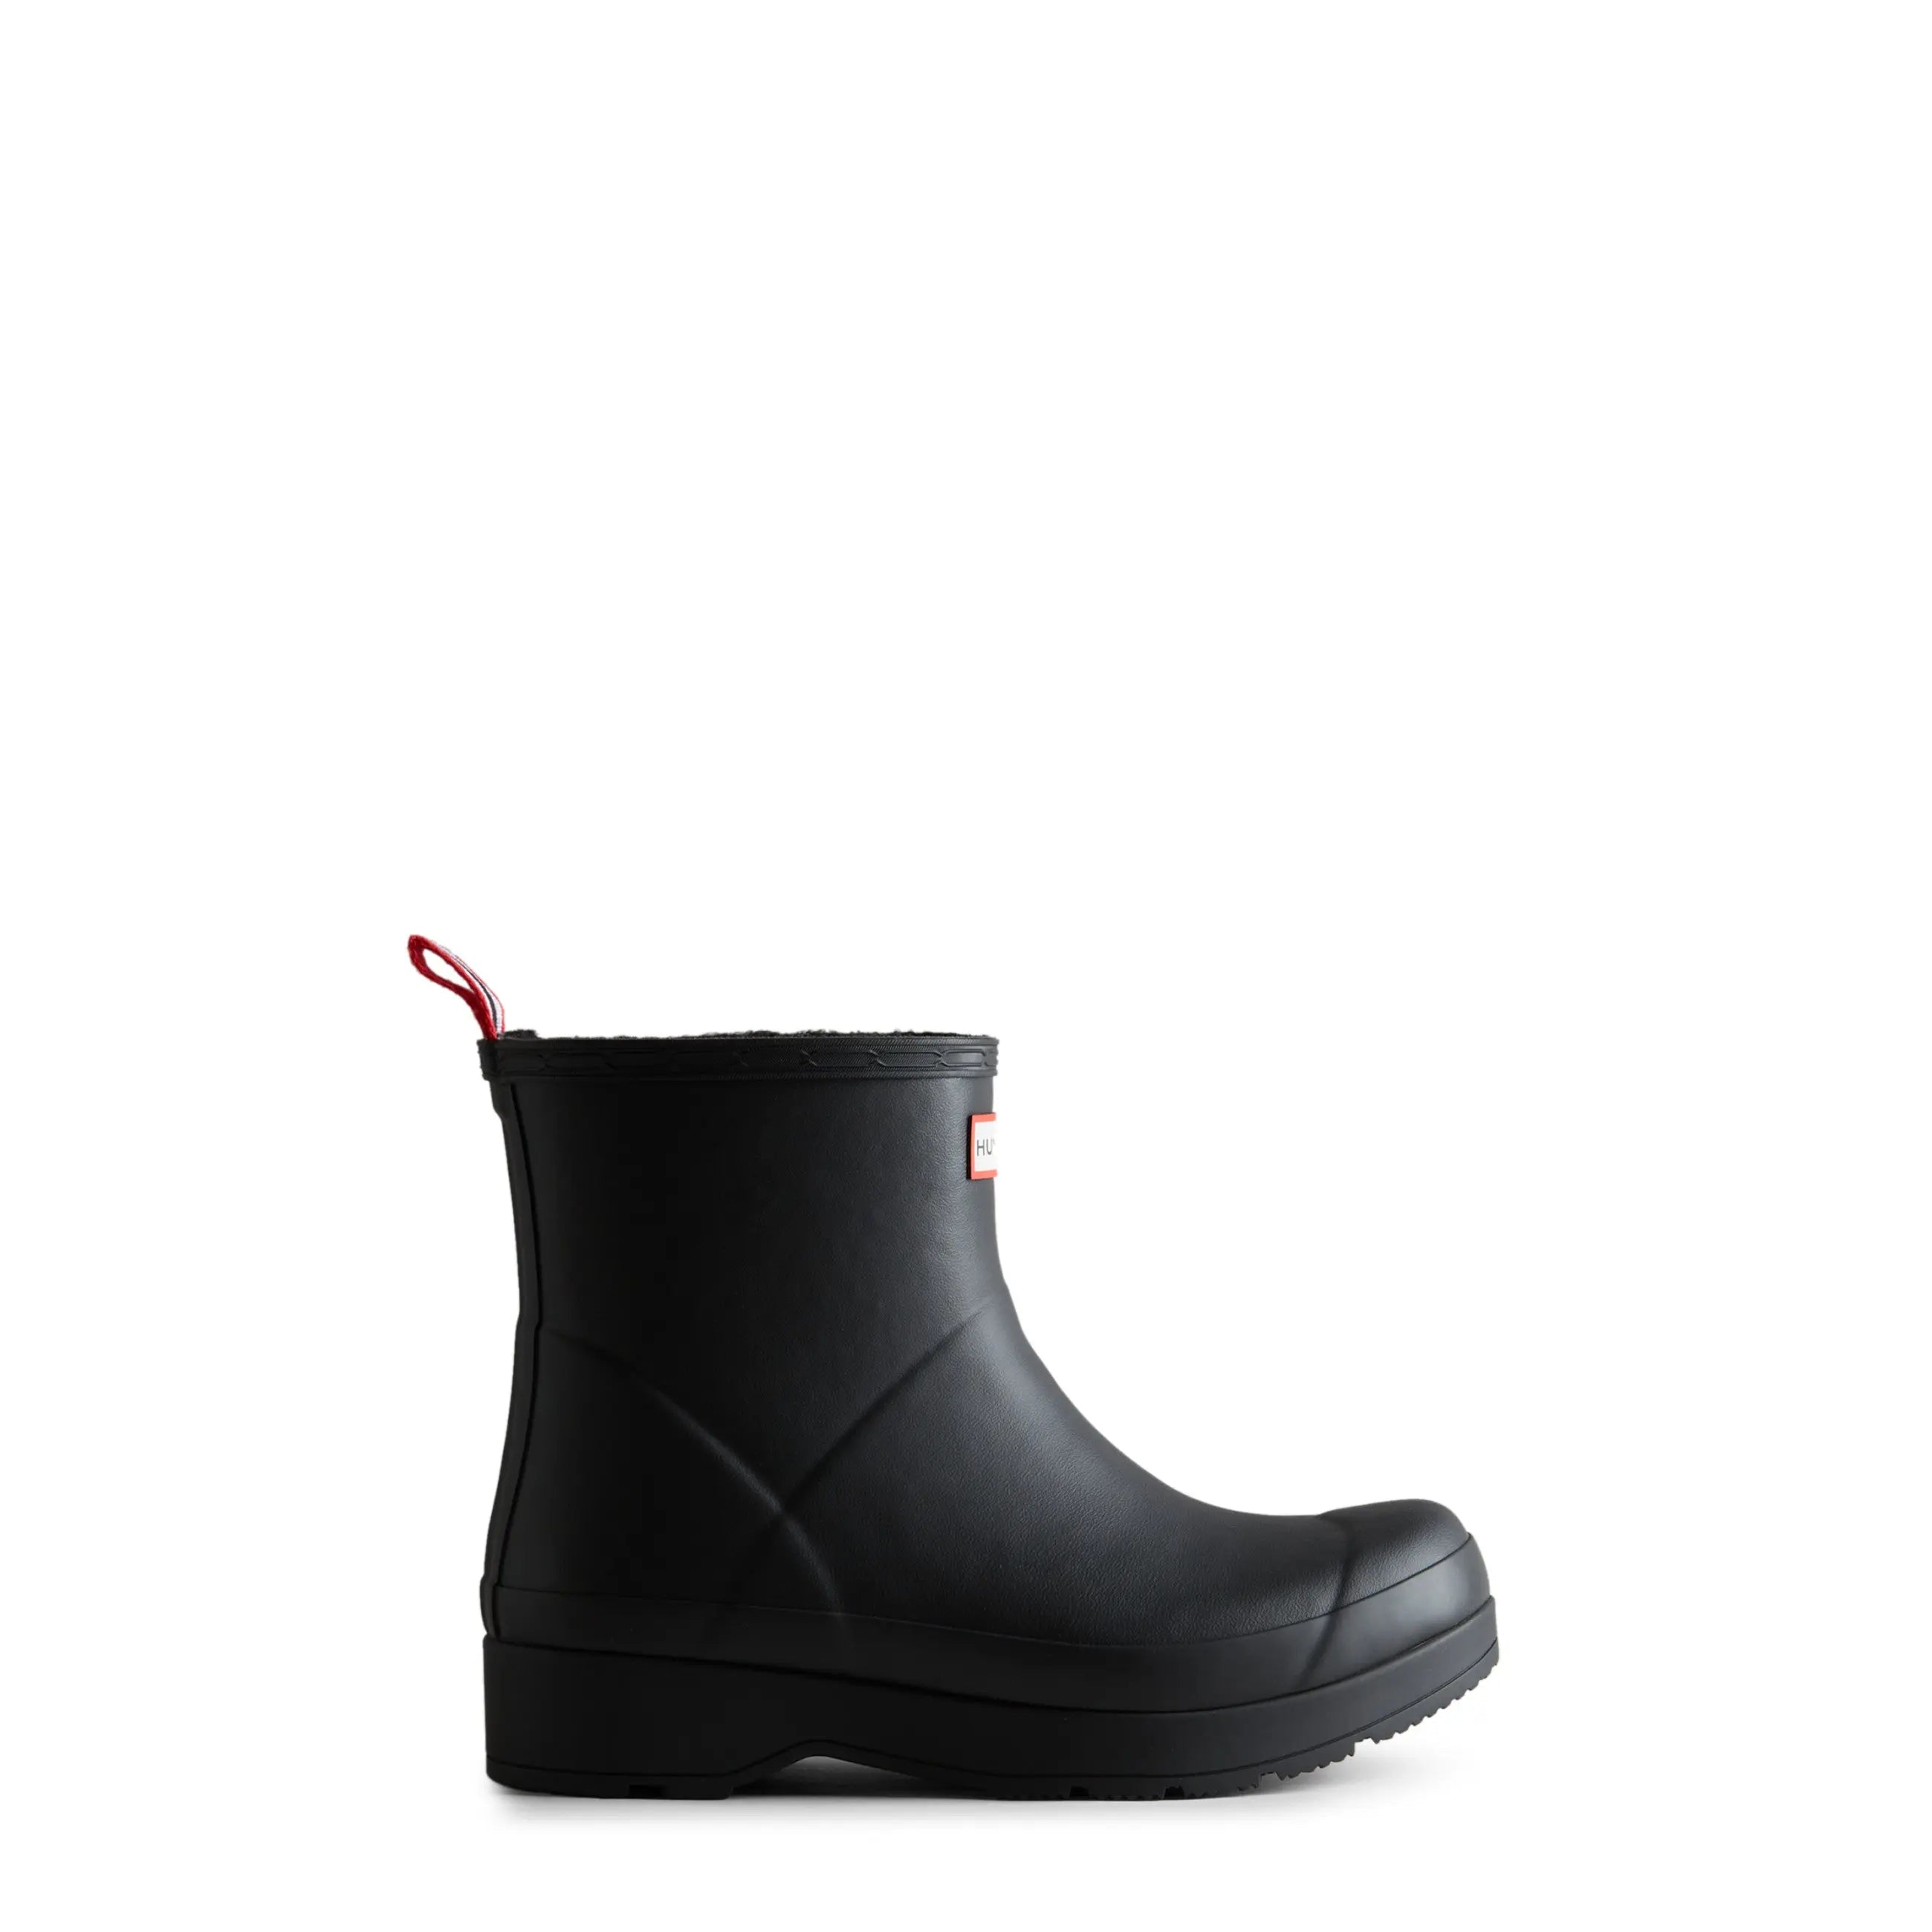 Men's PLAY™ Insulated Vegan Shearling Short Rain Boots - Hunter Boots Men's PLAY™ Insulated Vegan Shearling Short Rain Boots Black Hunter Boots Men's > Winter Footwear > Play Boots